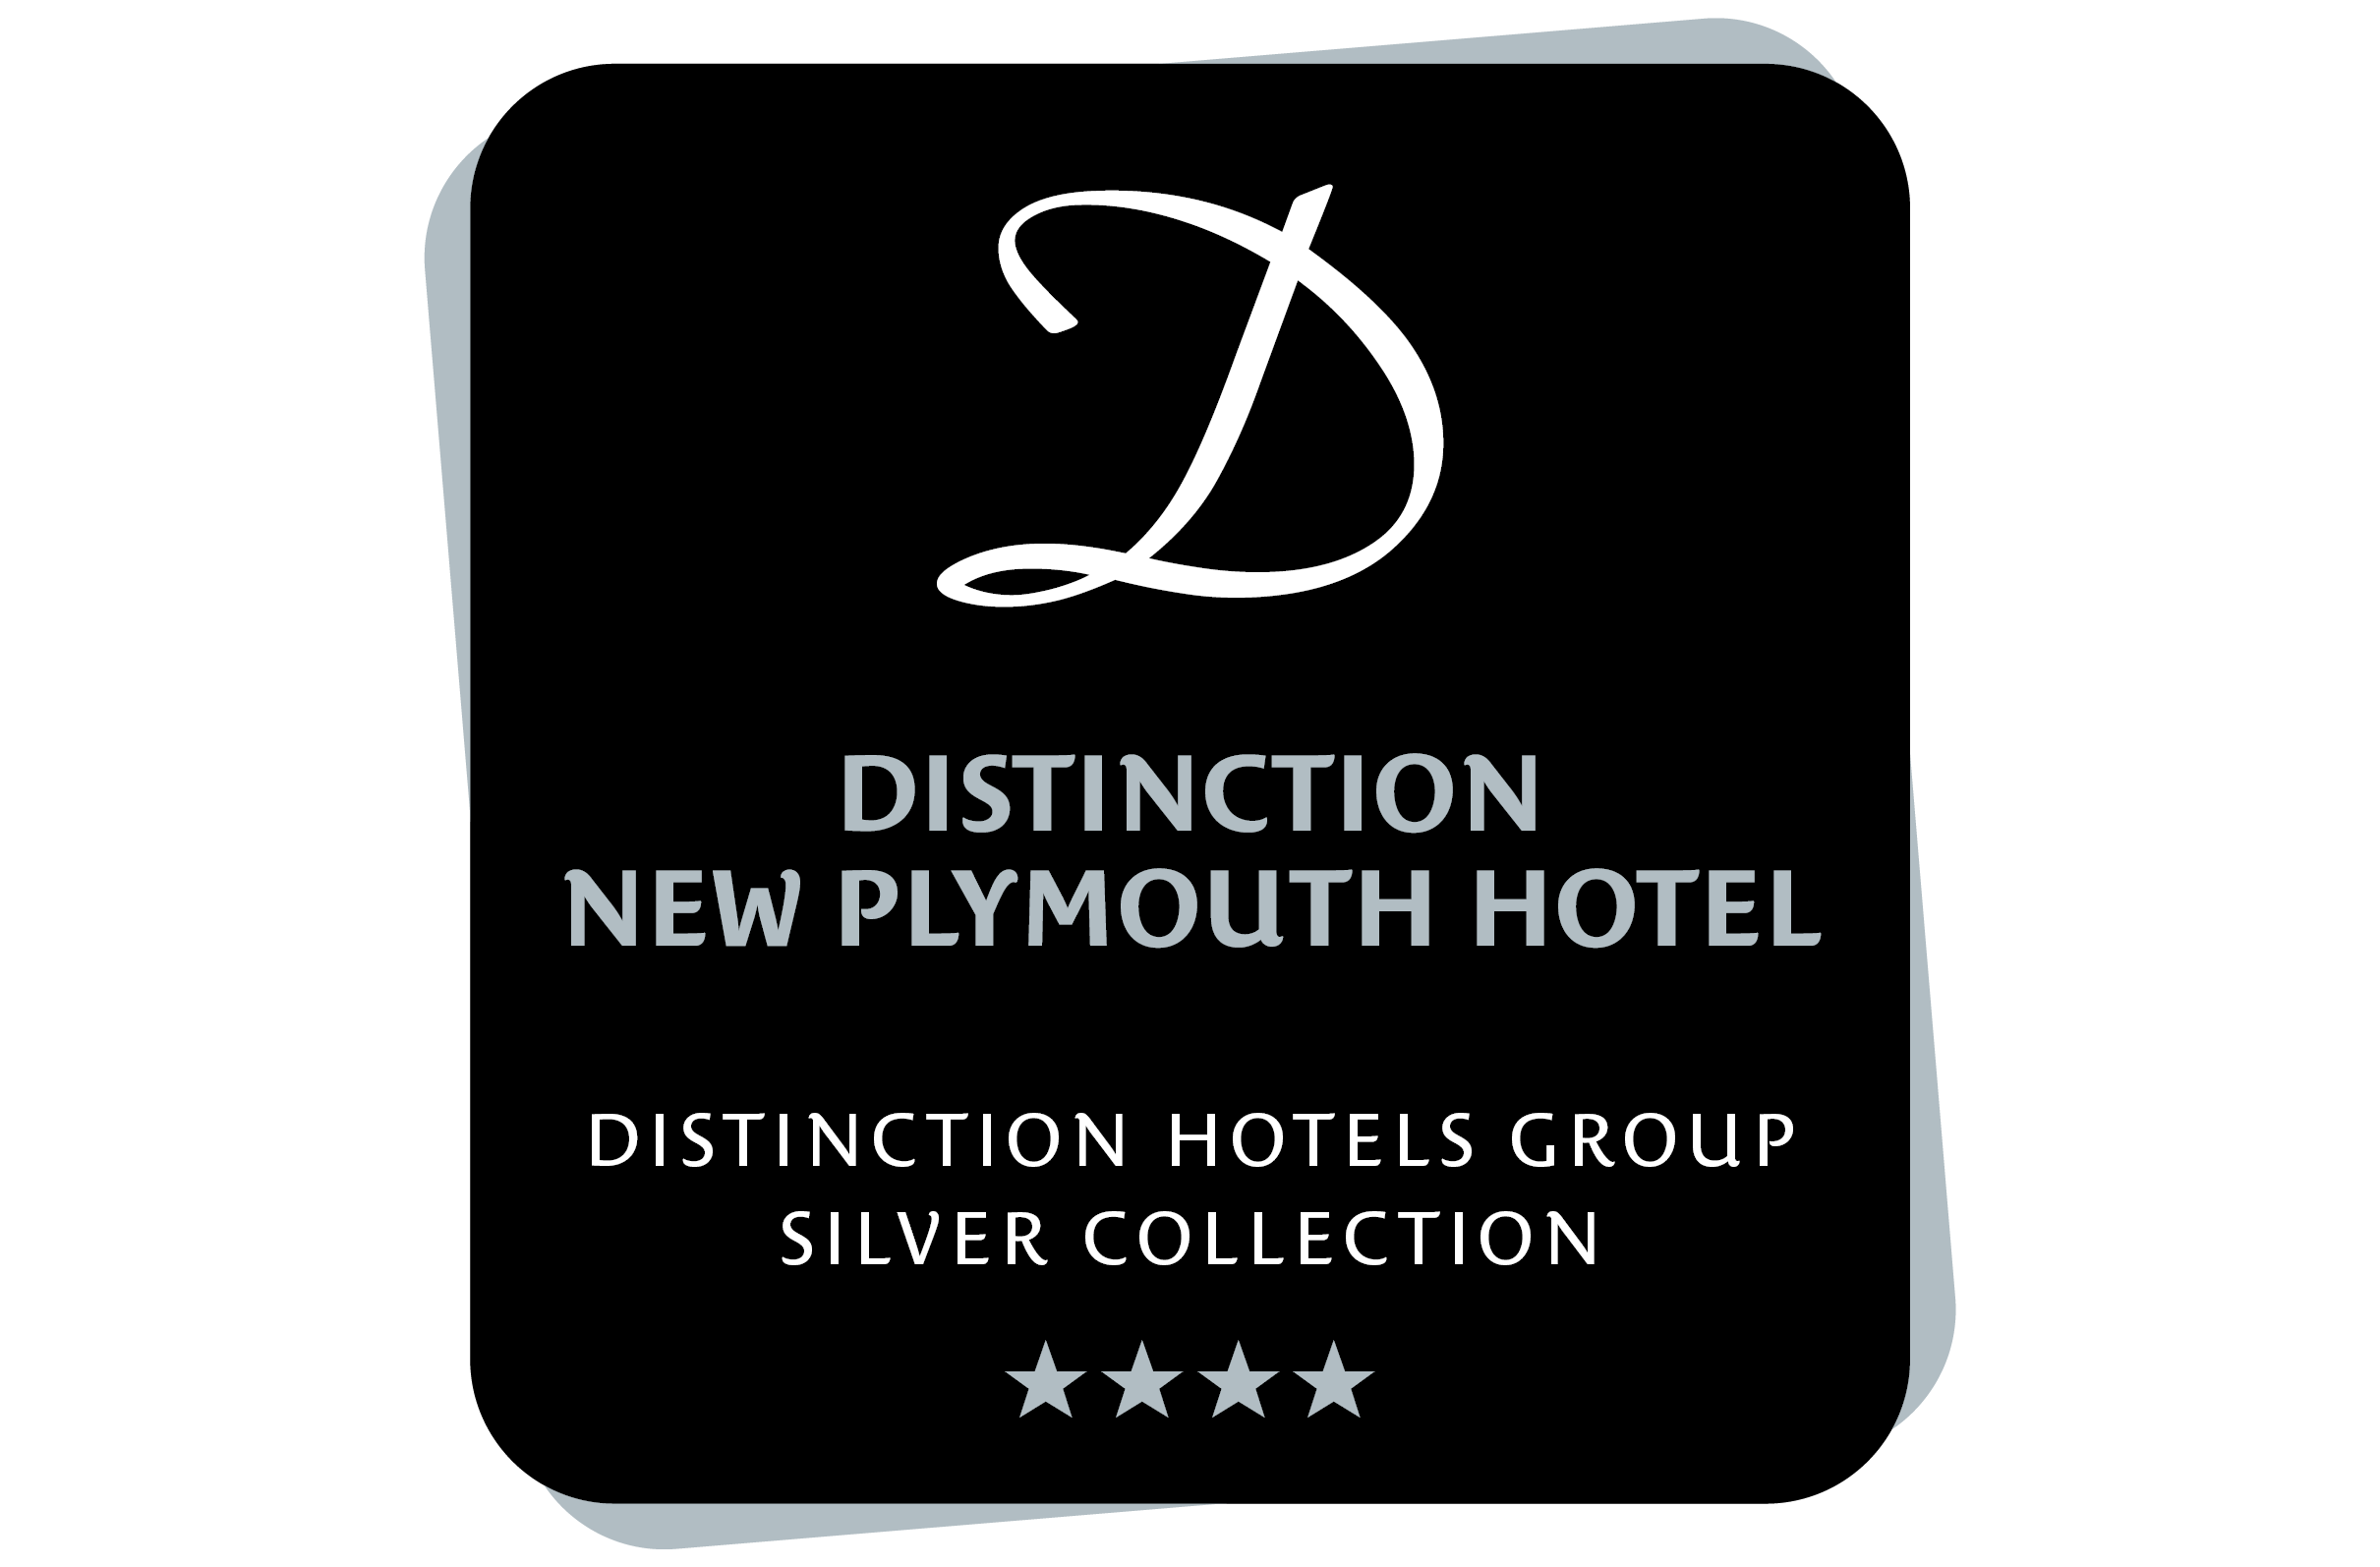 
Distinction New Plymouth Hotel